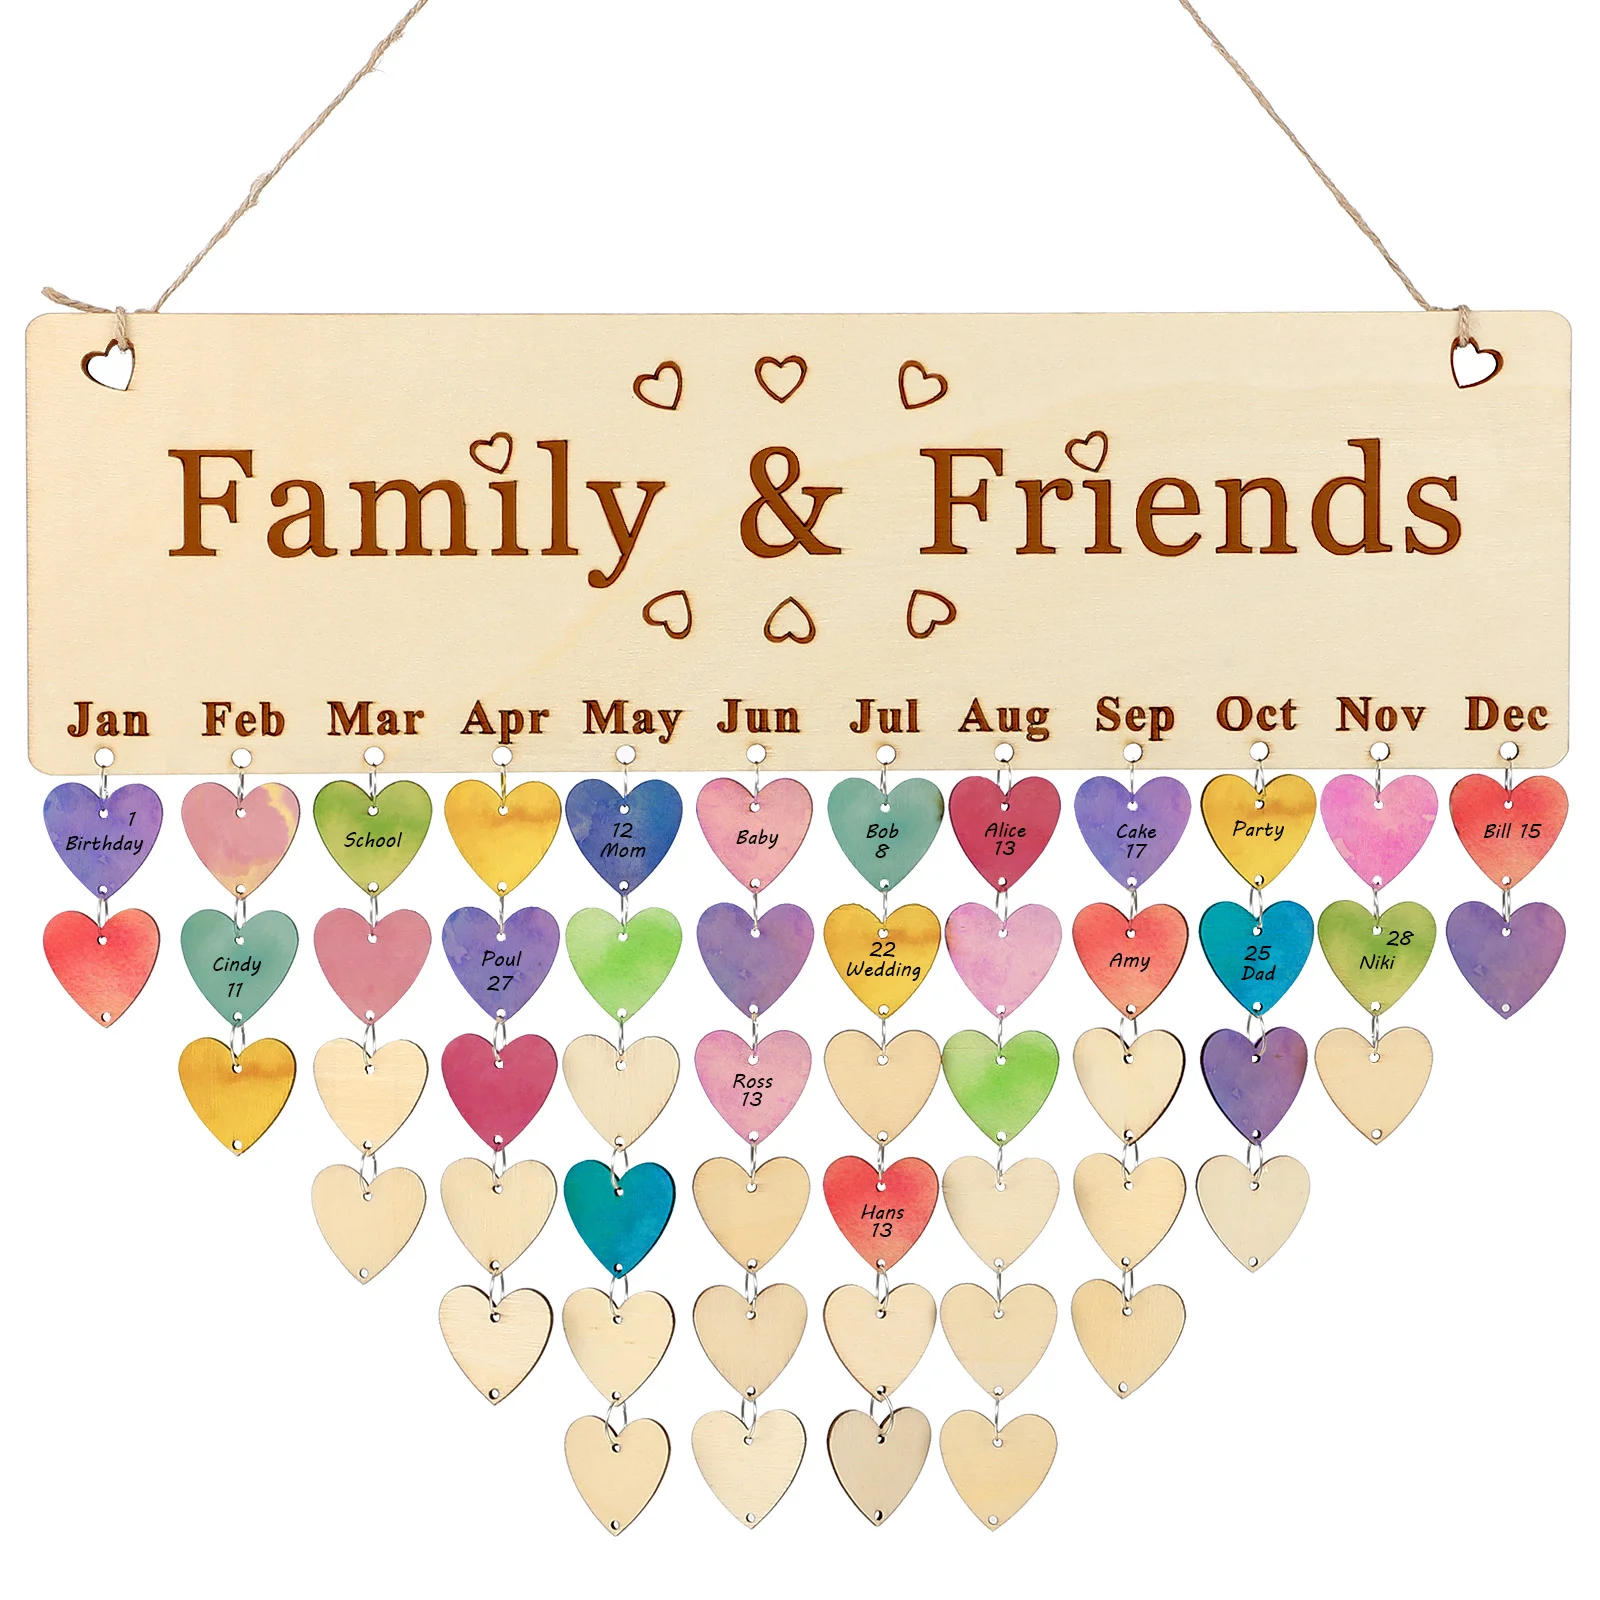 Family Birthday Calendars Reminder Wall Hanging Wall-mounted Plaque Tag Board Wooden